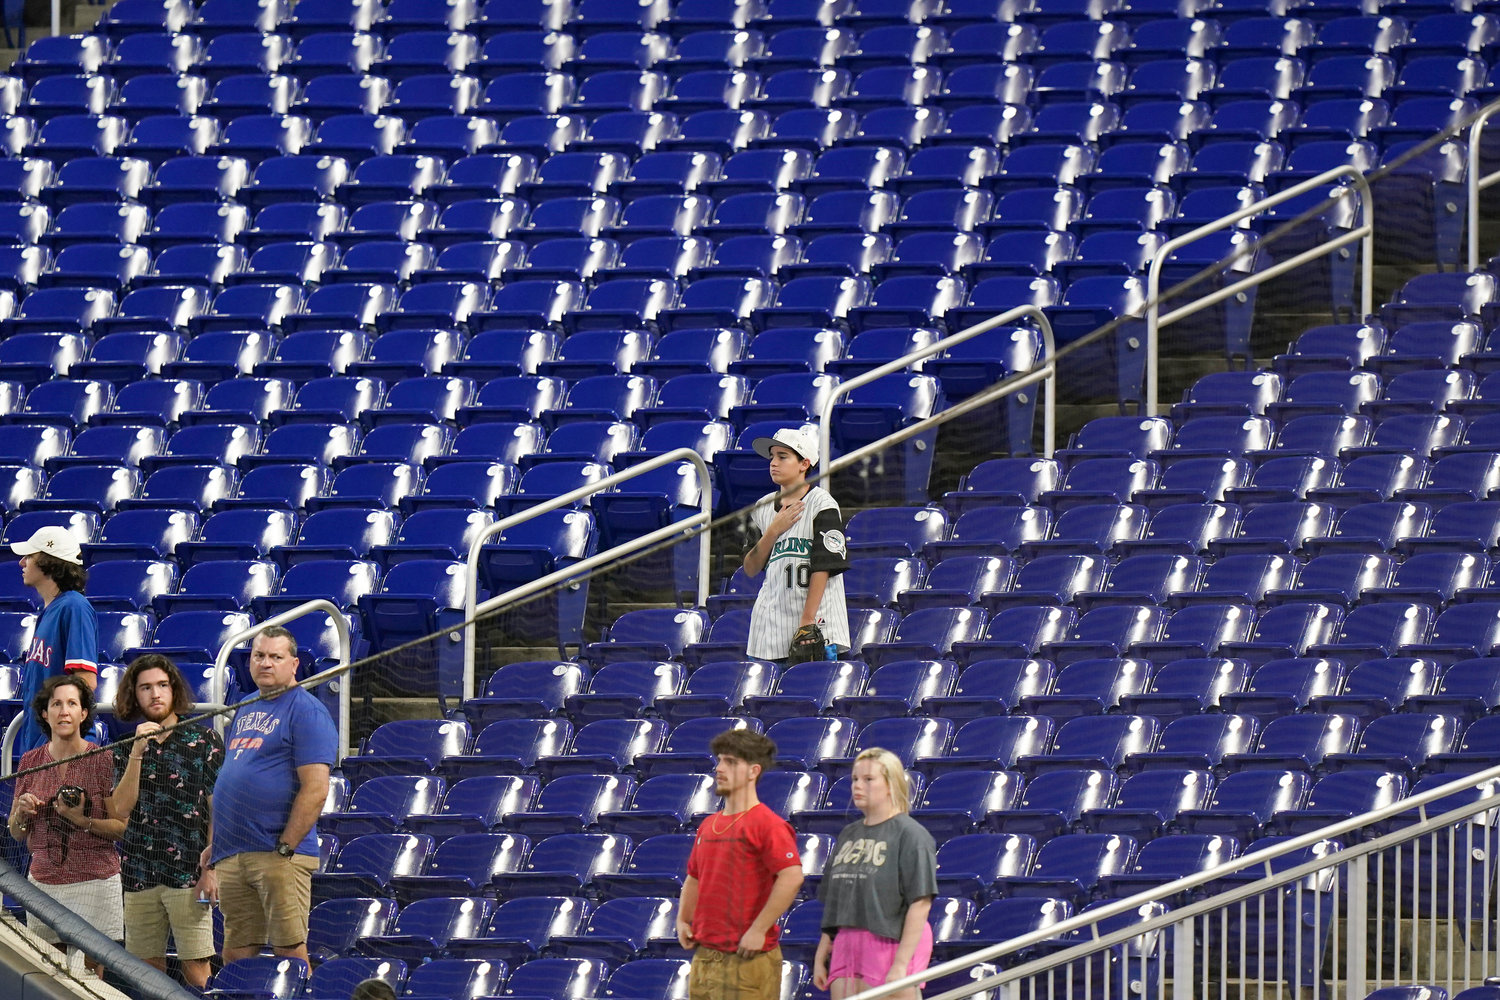 Baseball fans stand during the singing of the National Anthem before the start of a game between the Miami Marlins and the Texas Rangers, on Thursday in Miami. Major League Baseball teams head into the final months of the regular season struggling to fill the stands now, even without pandemic-related attendance restrictions.